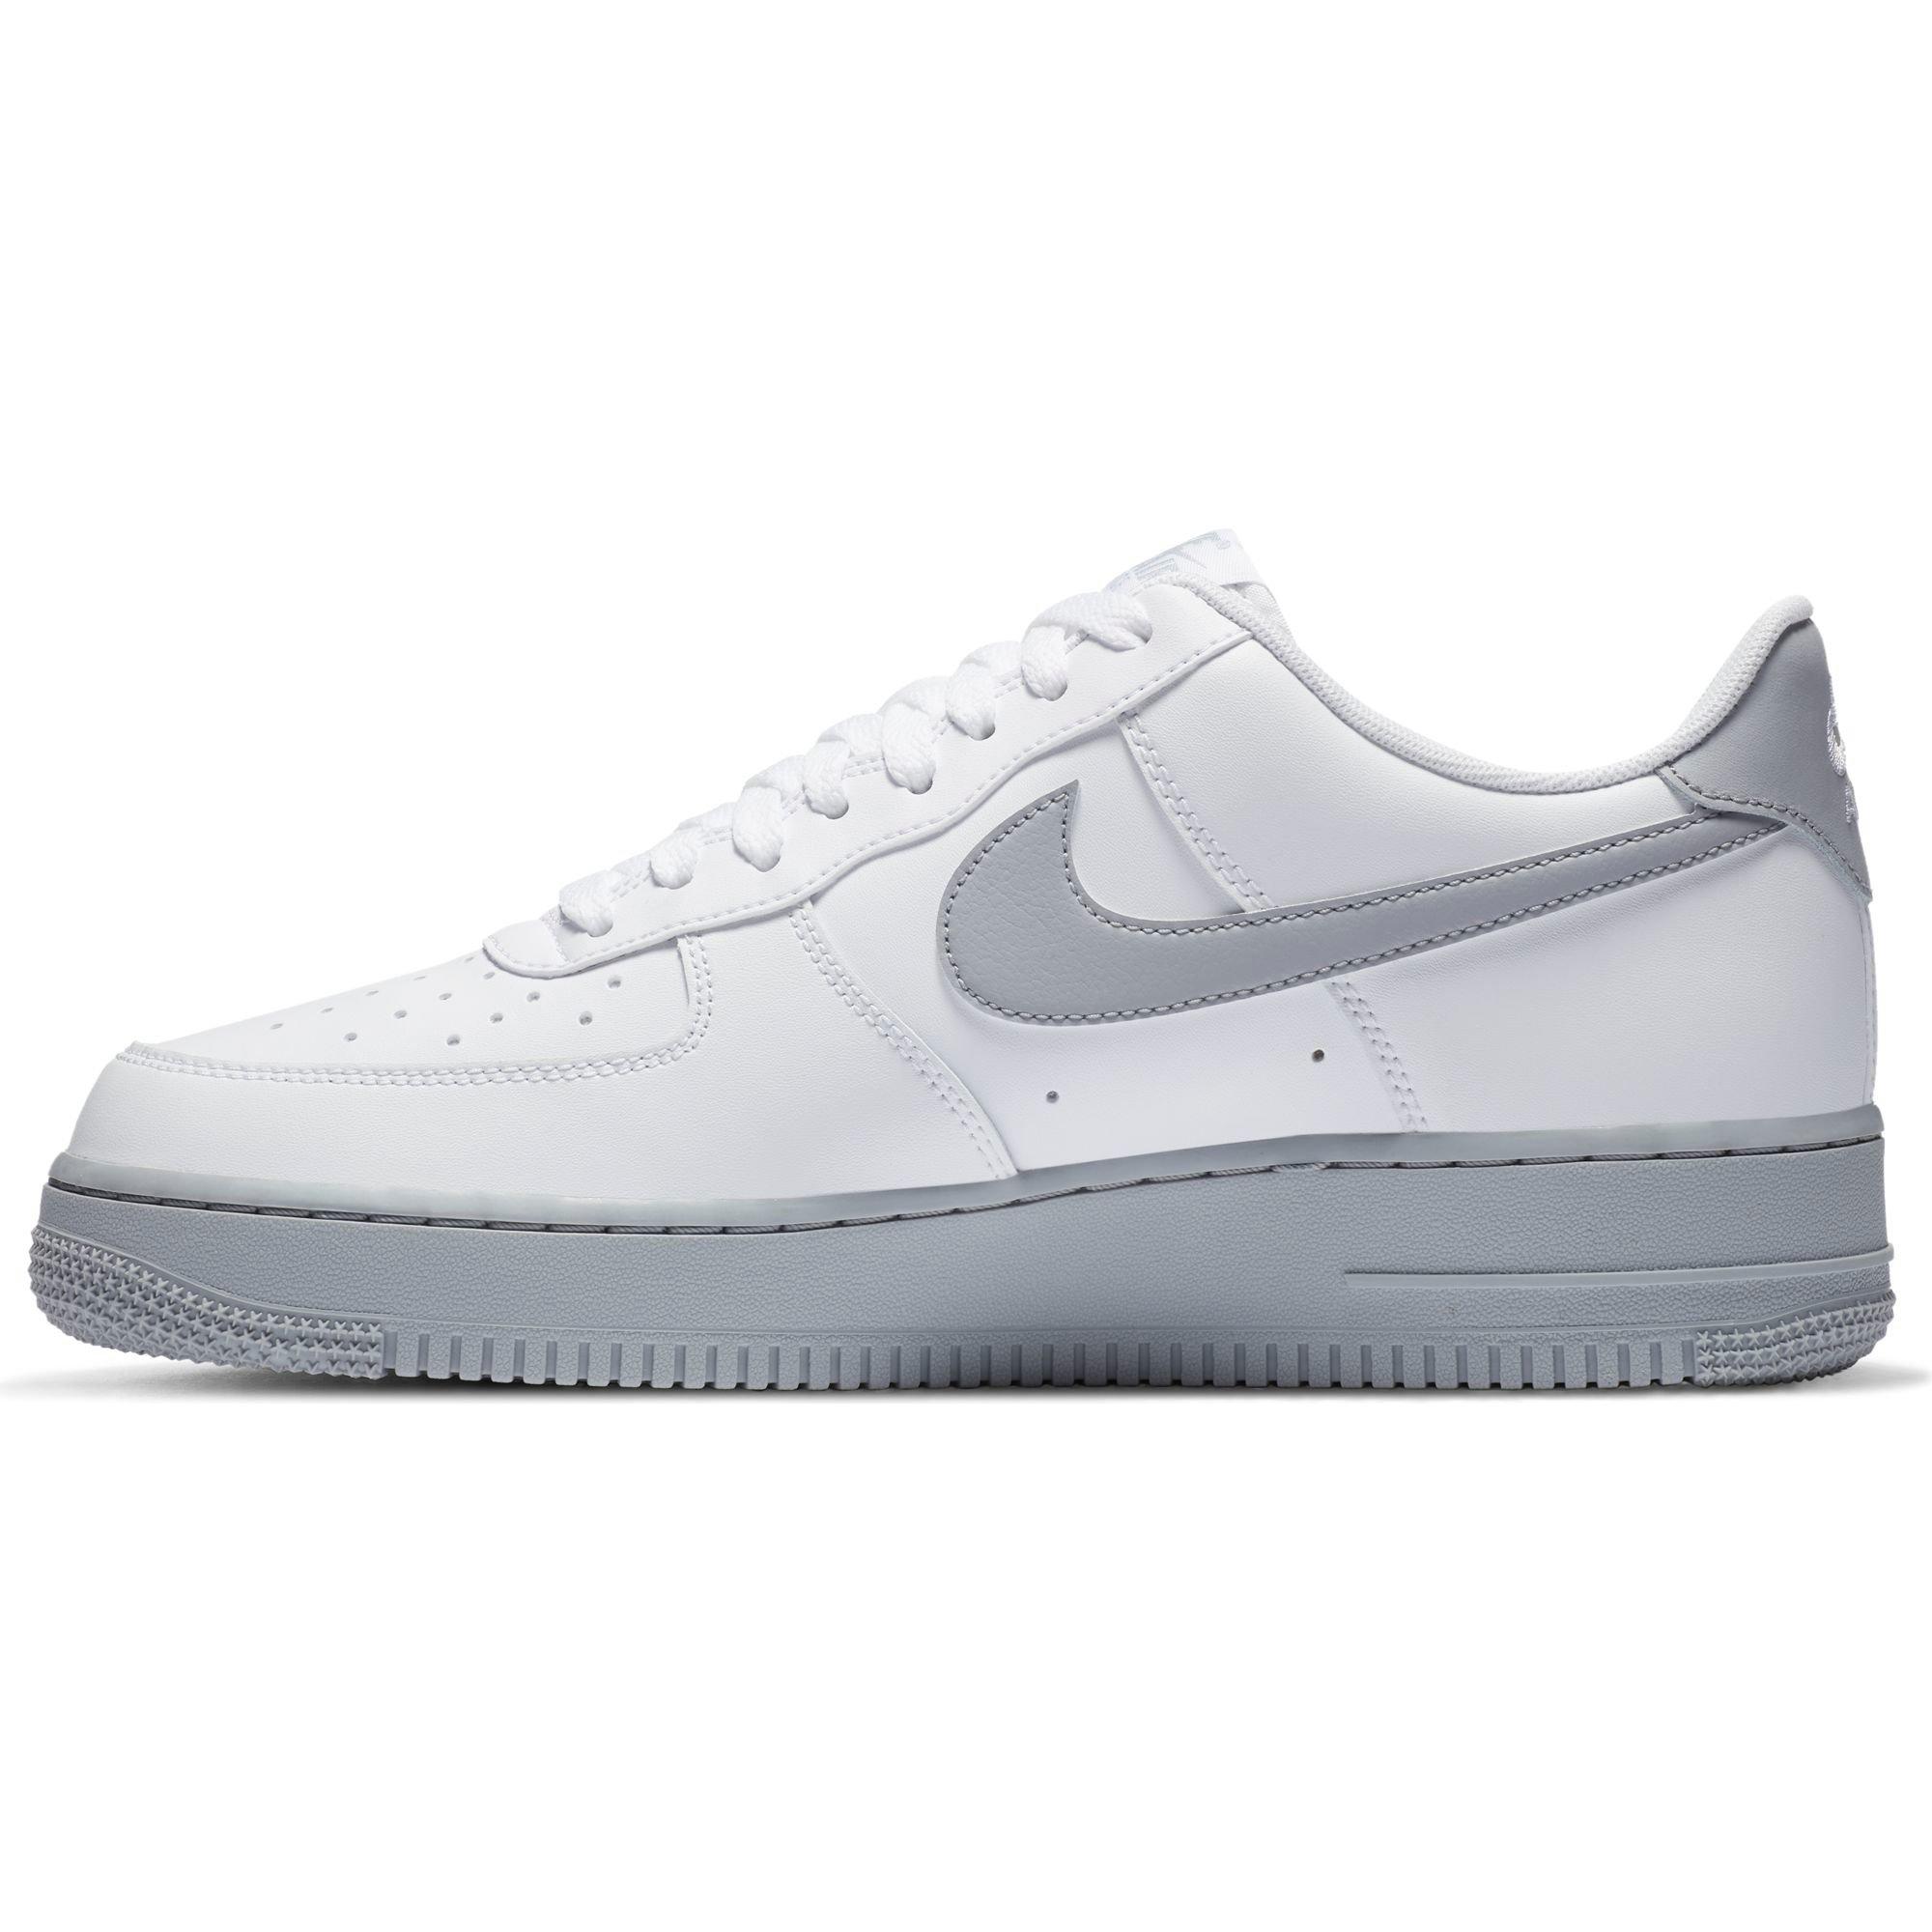 air force 1s grey and white